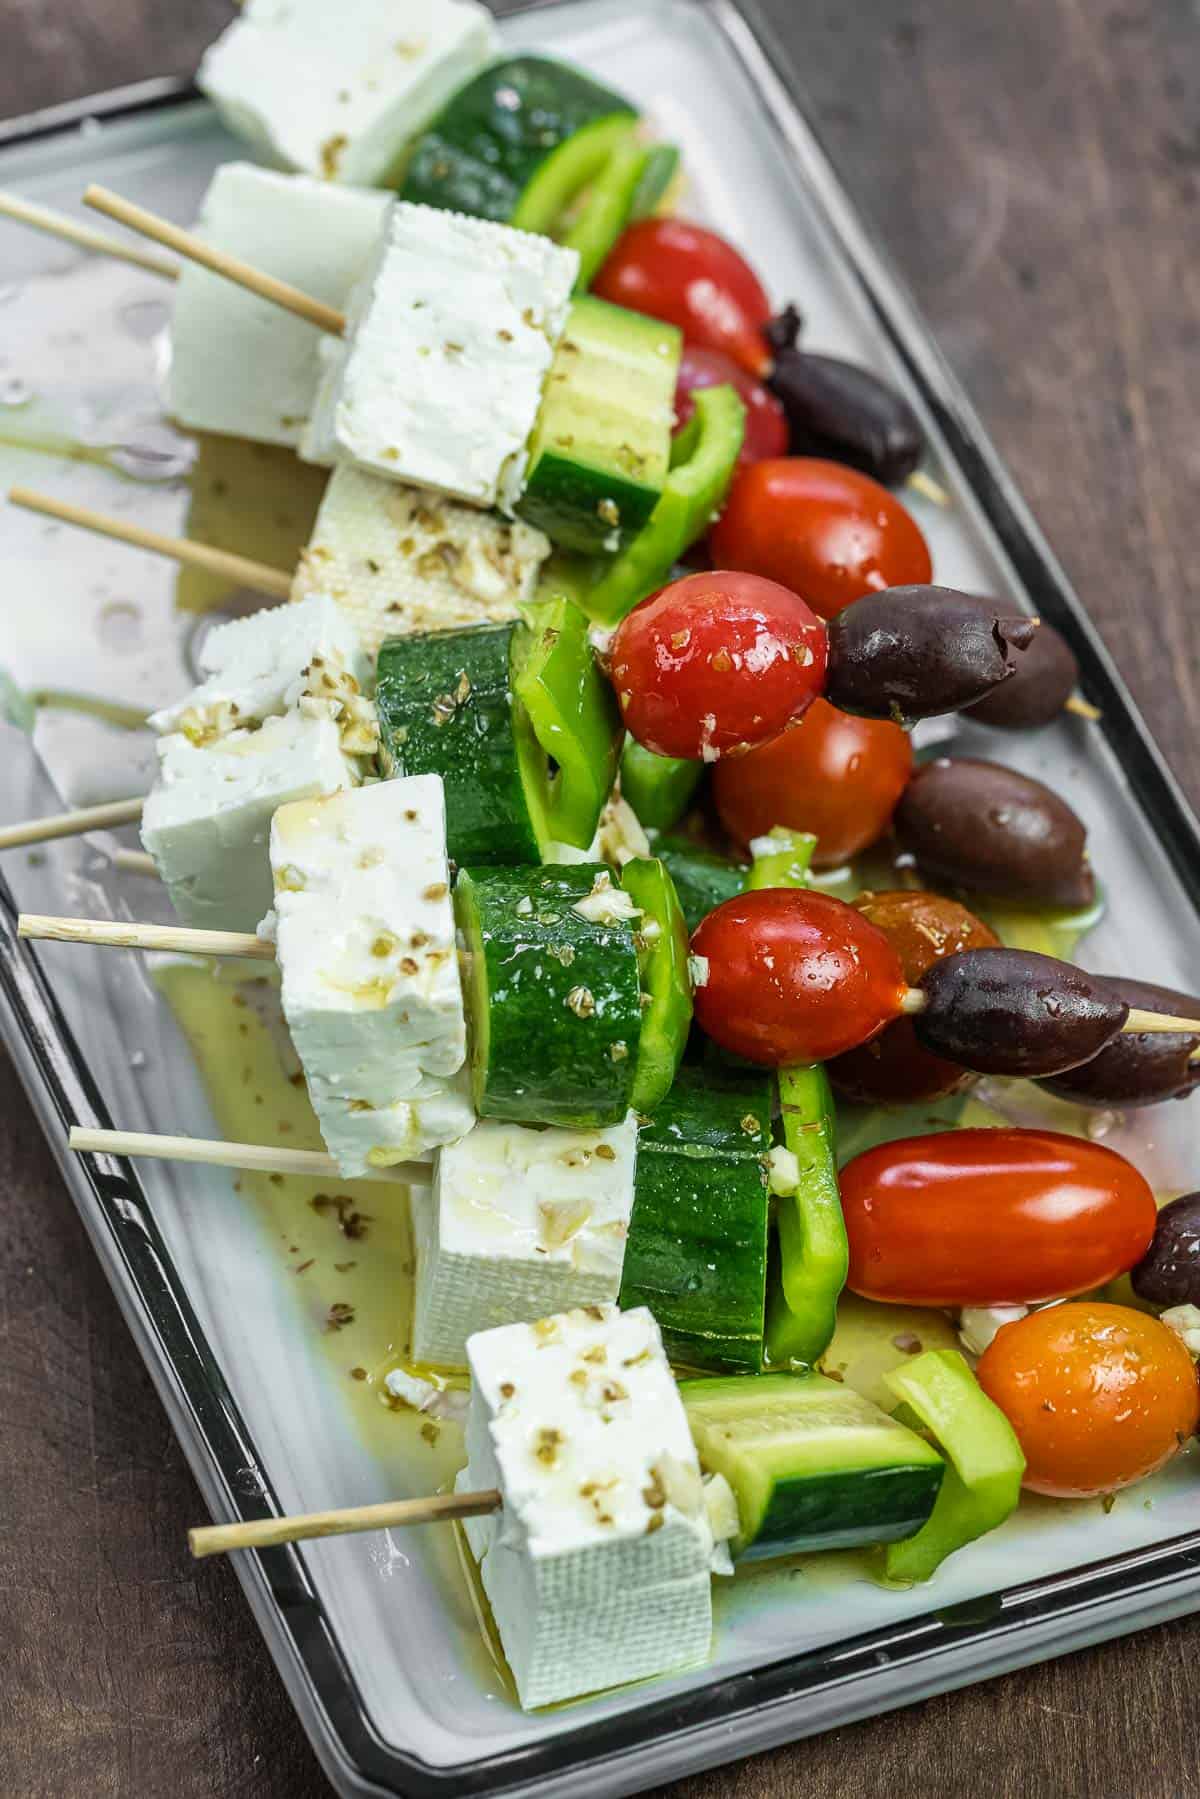 Greek salad skewers with olives, grape tomatoes, bell peppers, cucumber, and feta cheese.